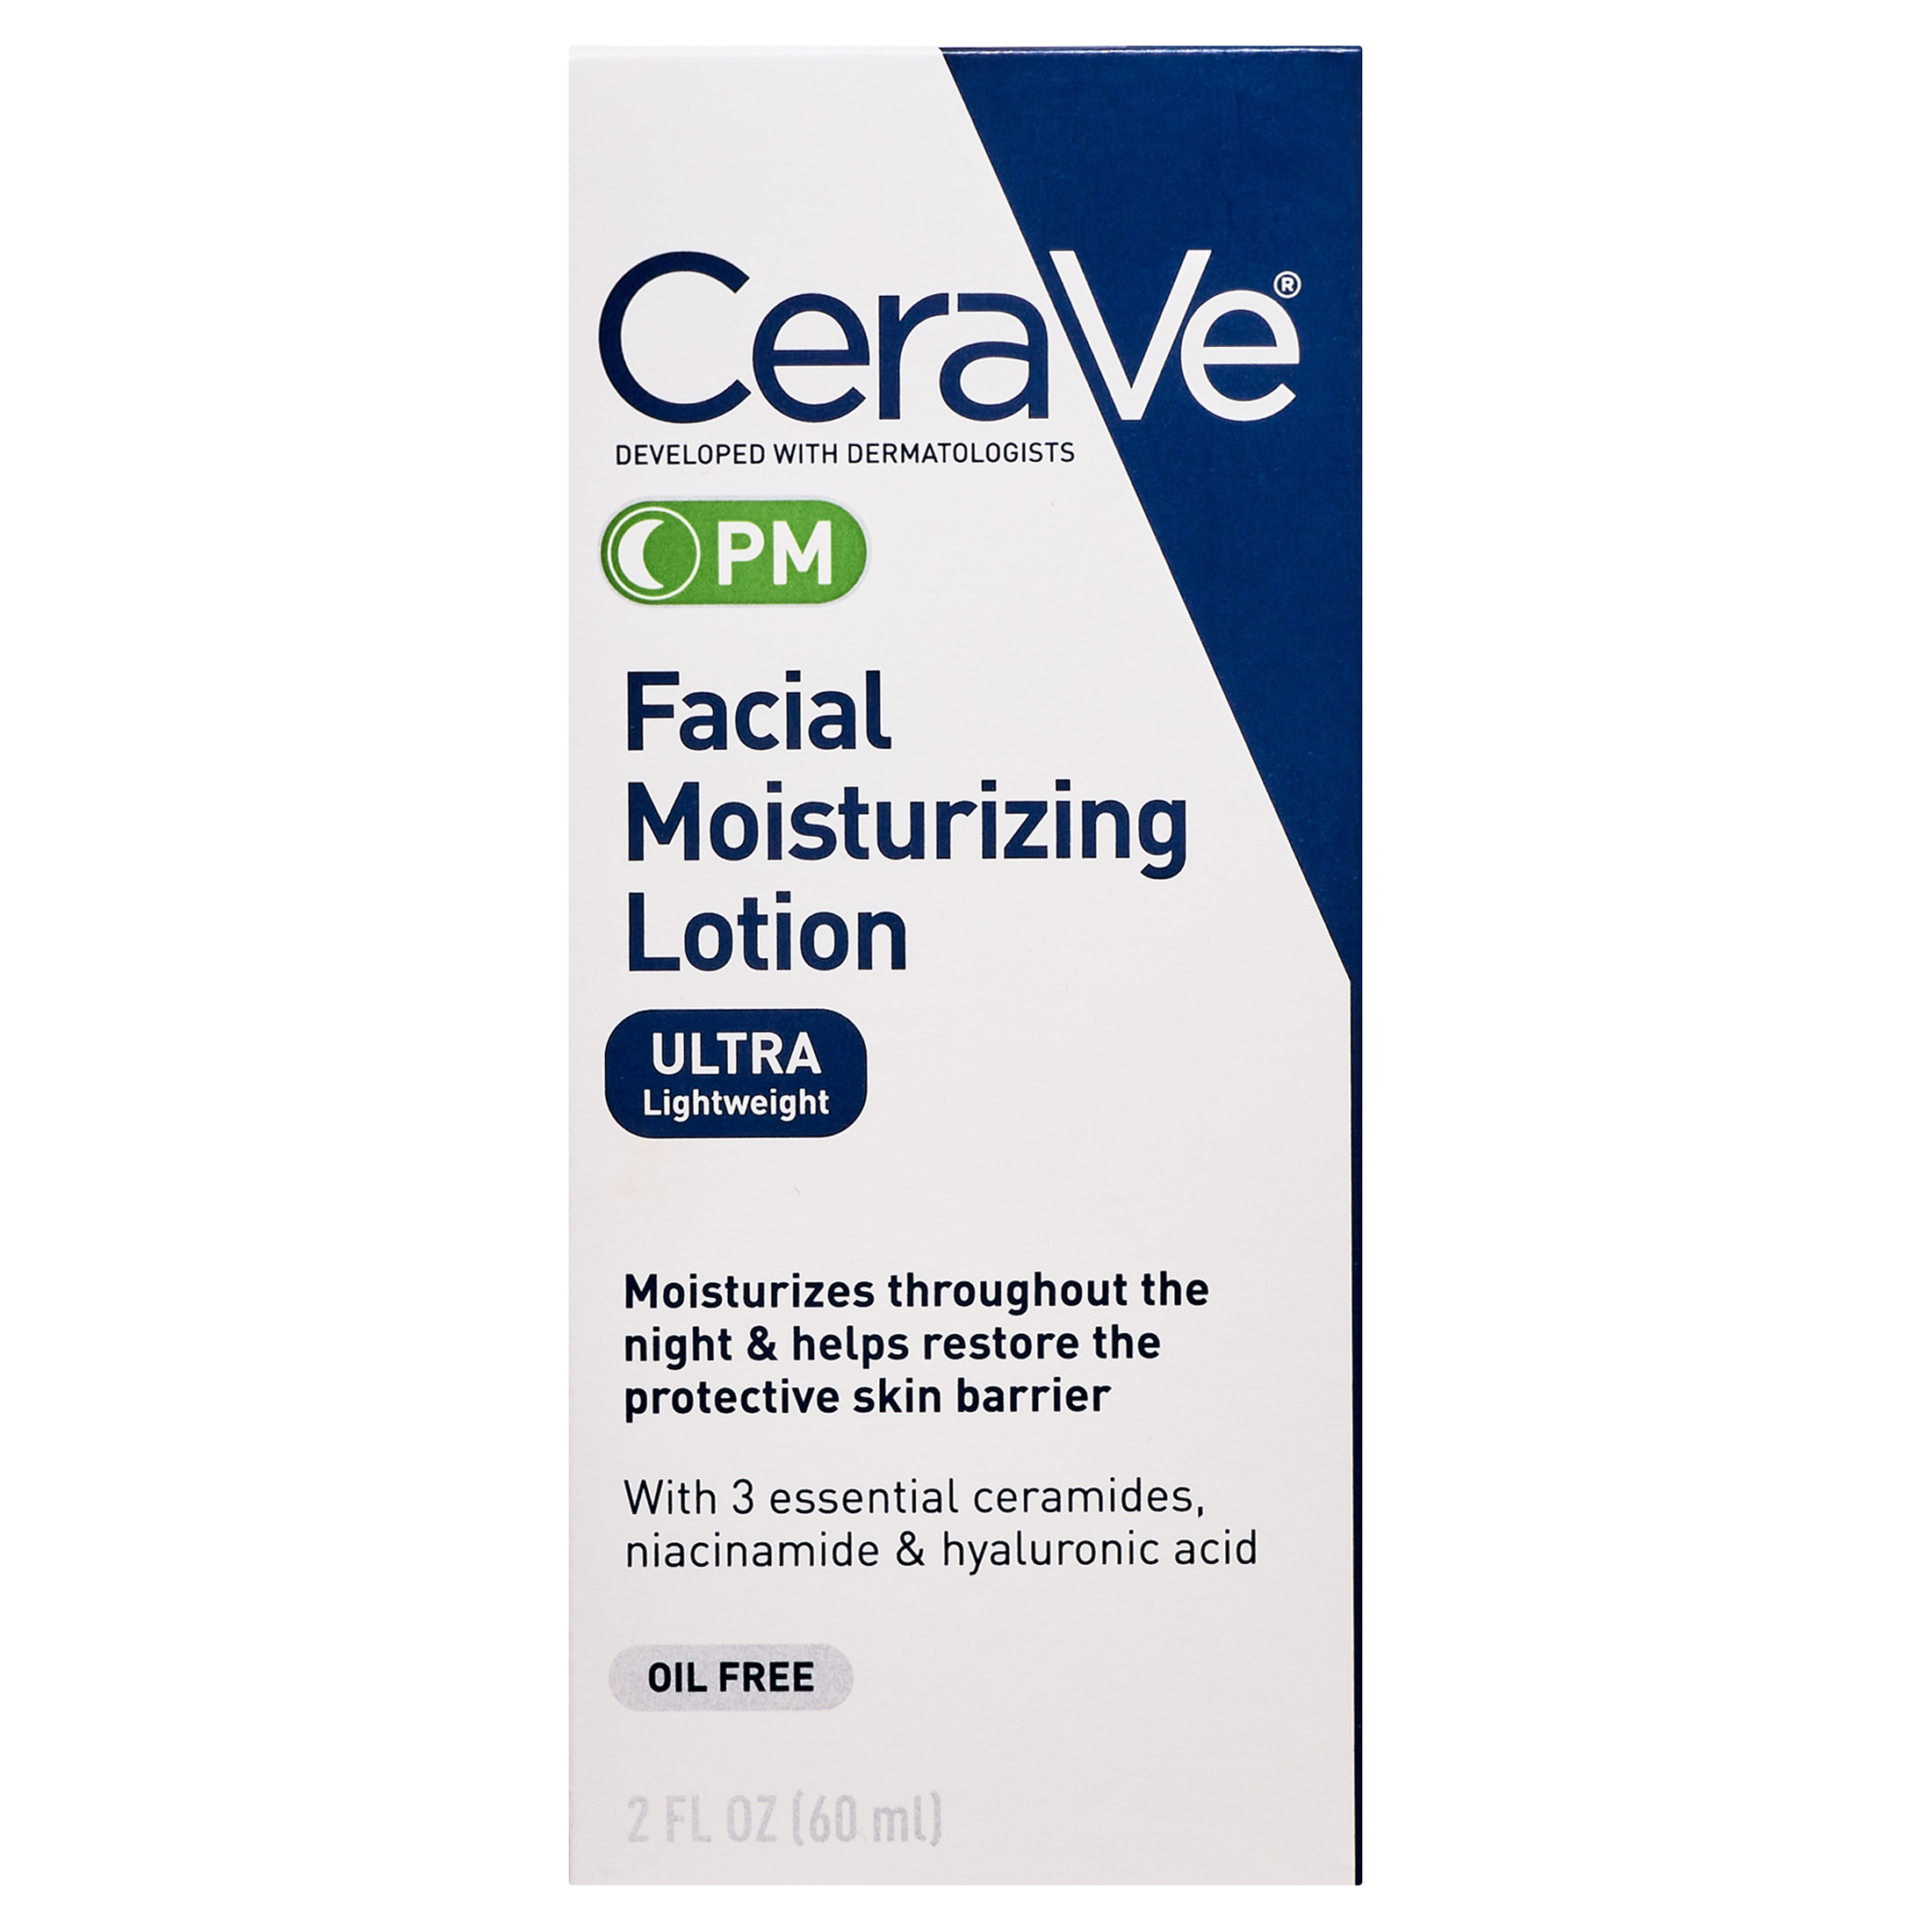 CeraVe PM Lotion Face Moisturizer, Lightweight Oil-free Night Cream for All Skin Types, 2 fl oz - image 1 of 16